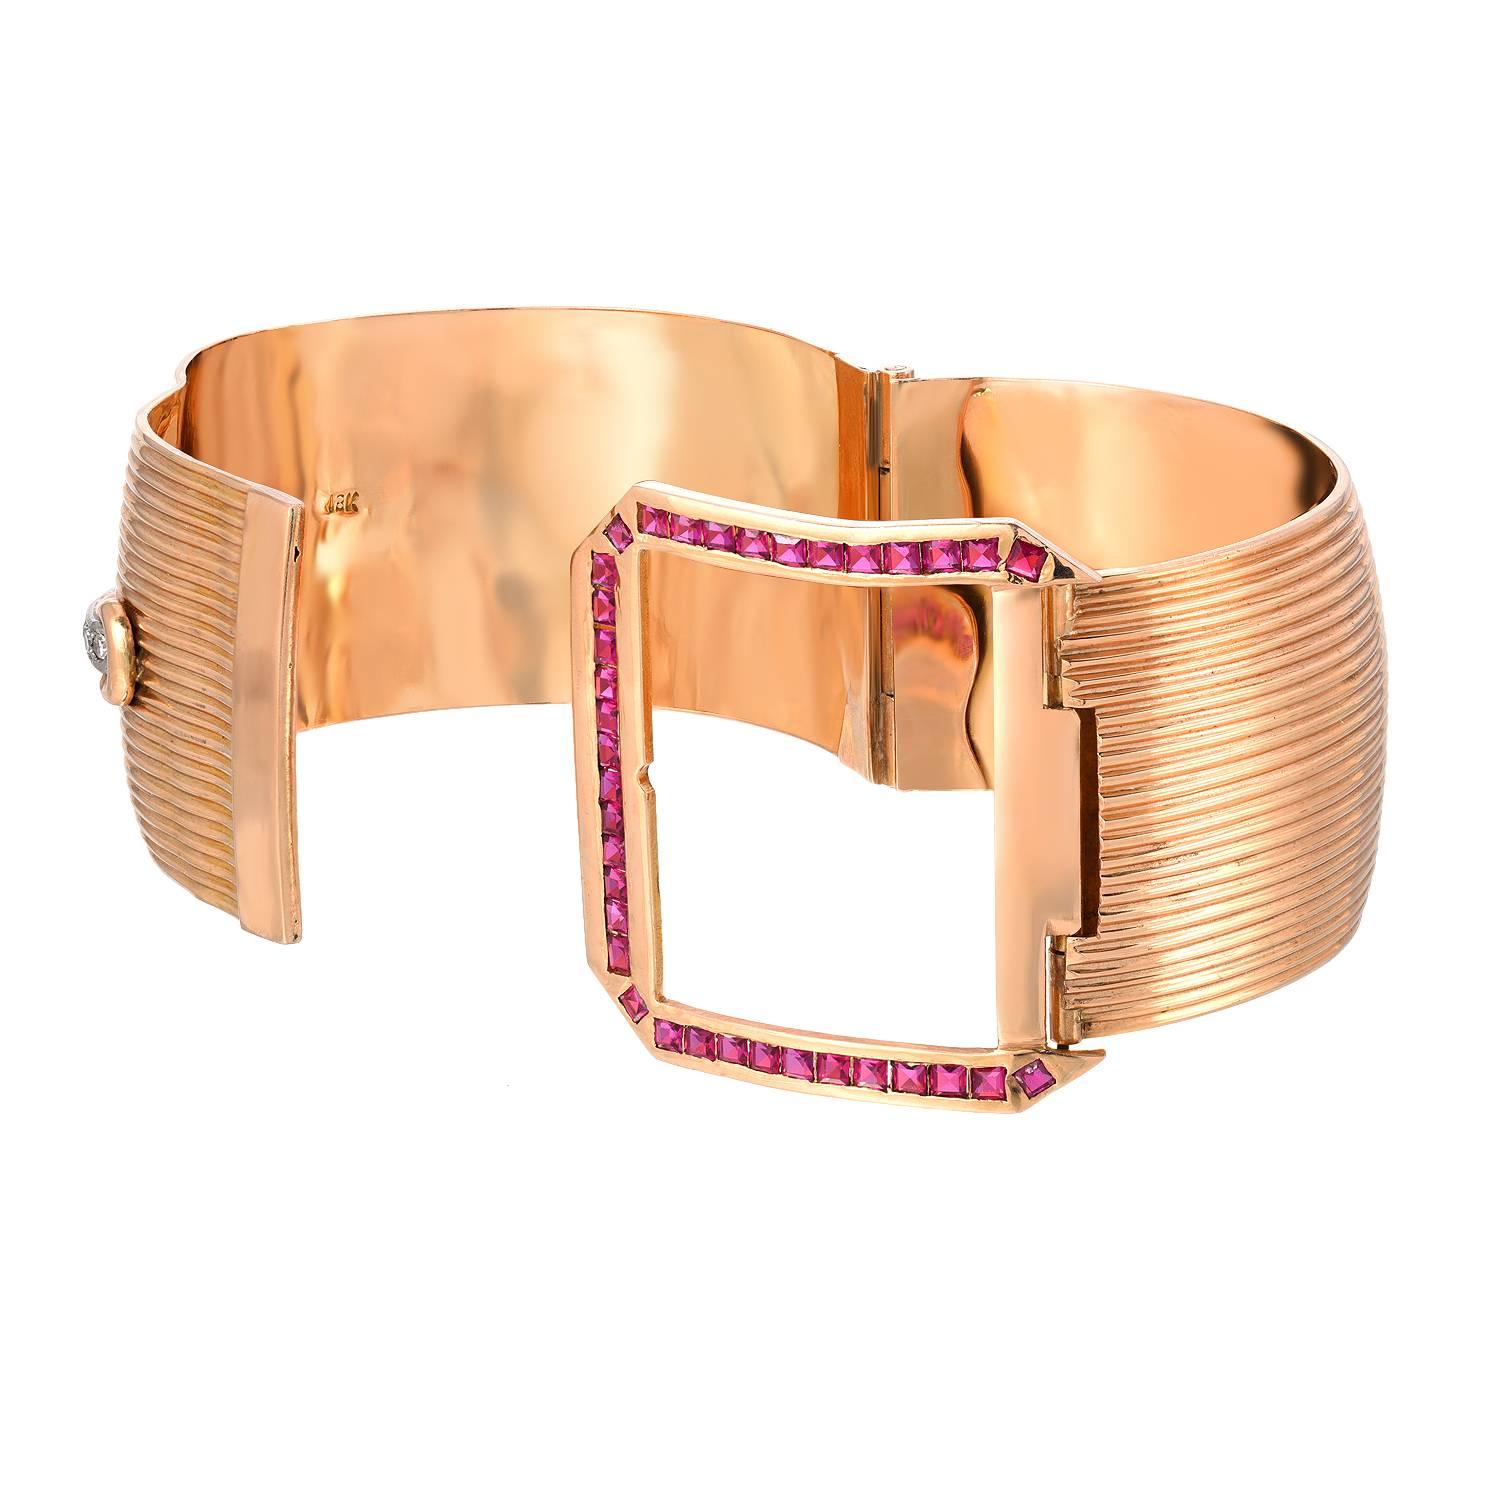 This beautiful 18K Yellow Gold Retro bracelet is a bangle, with a buckle closure. The buckle has carre cut rubies and graduated round brilliant diamonds. The closure is completely secure, as it follows a few steps. The gold is ridged and 1 3/8